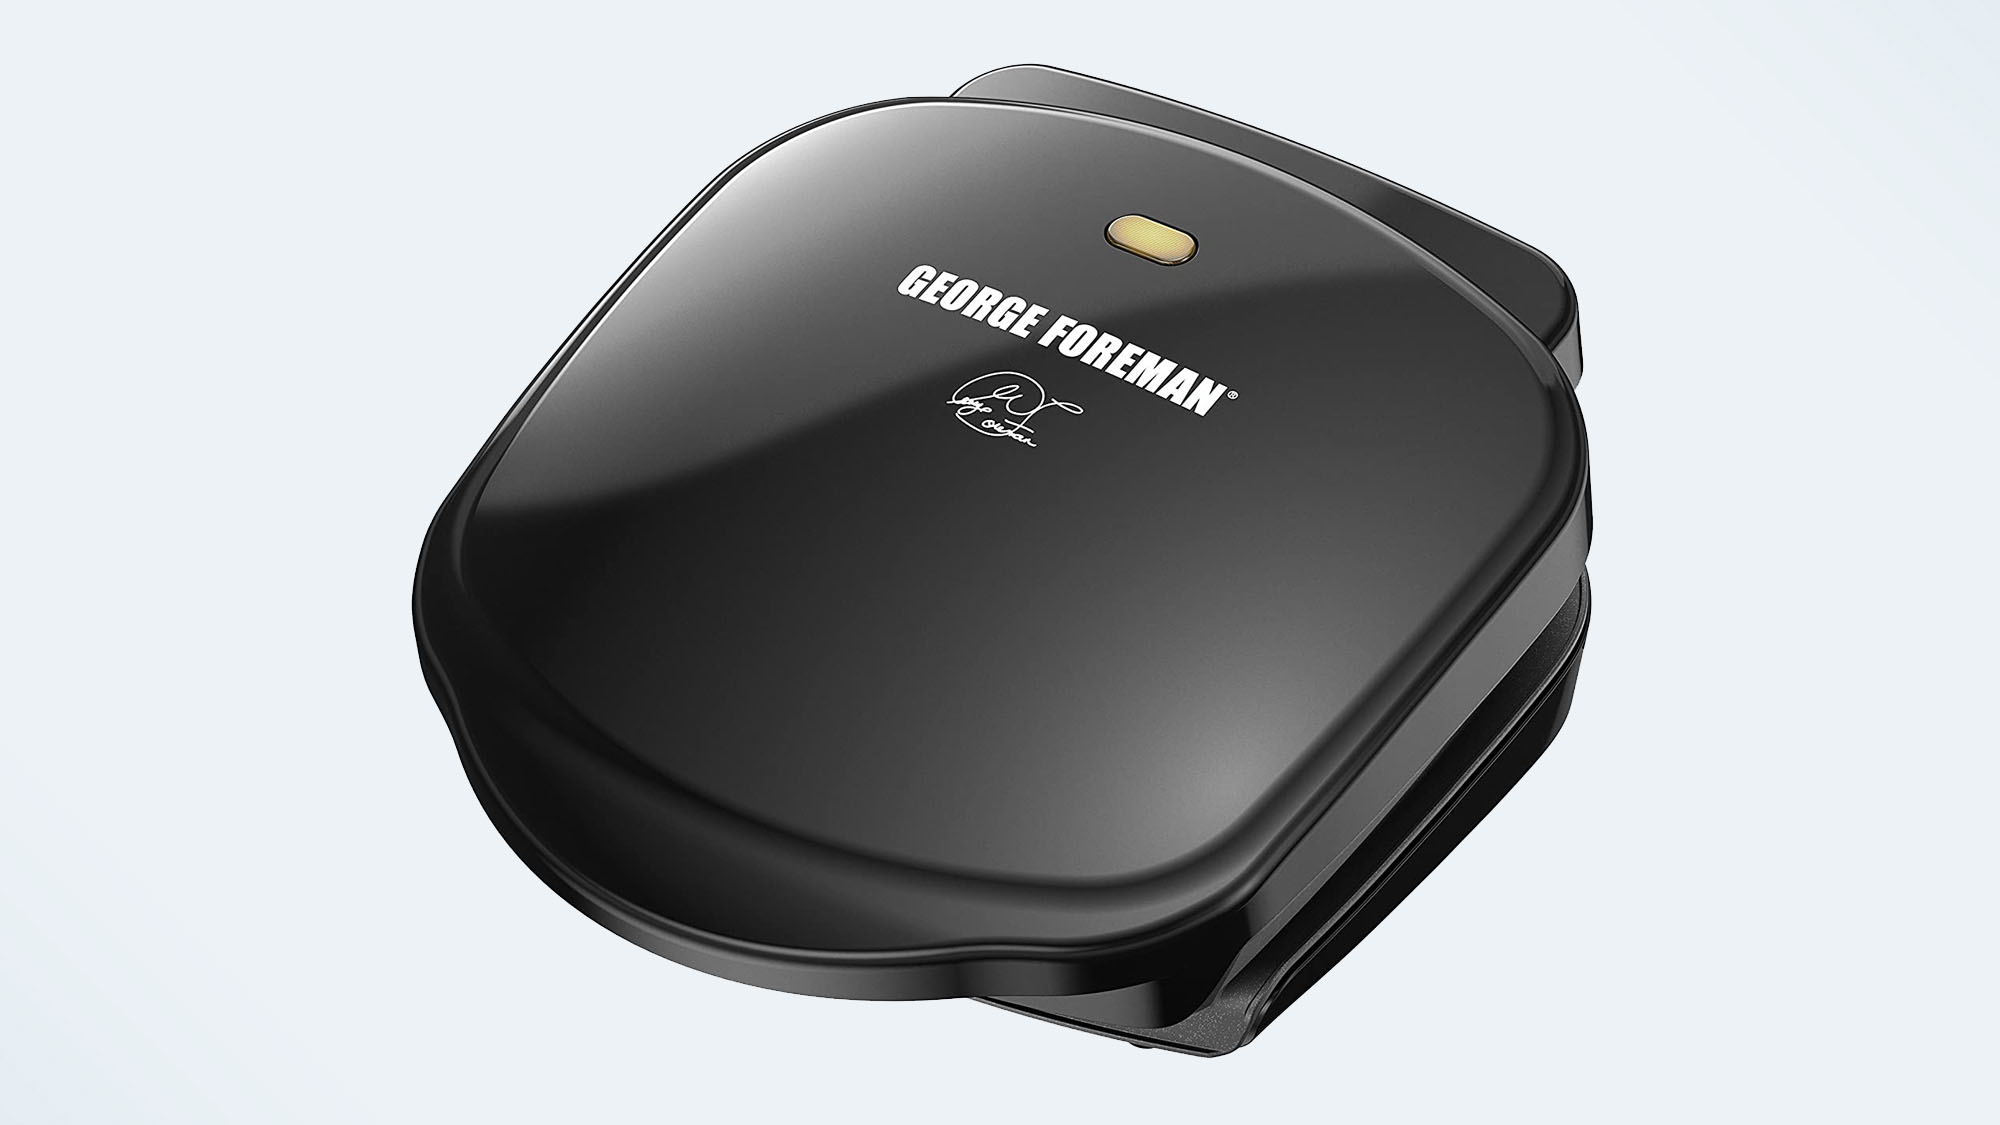 Best Appliances for Student Living: The George Foreman Classic Indoor Electric Double Grill and Panini Press